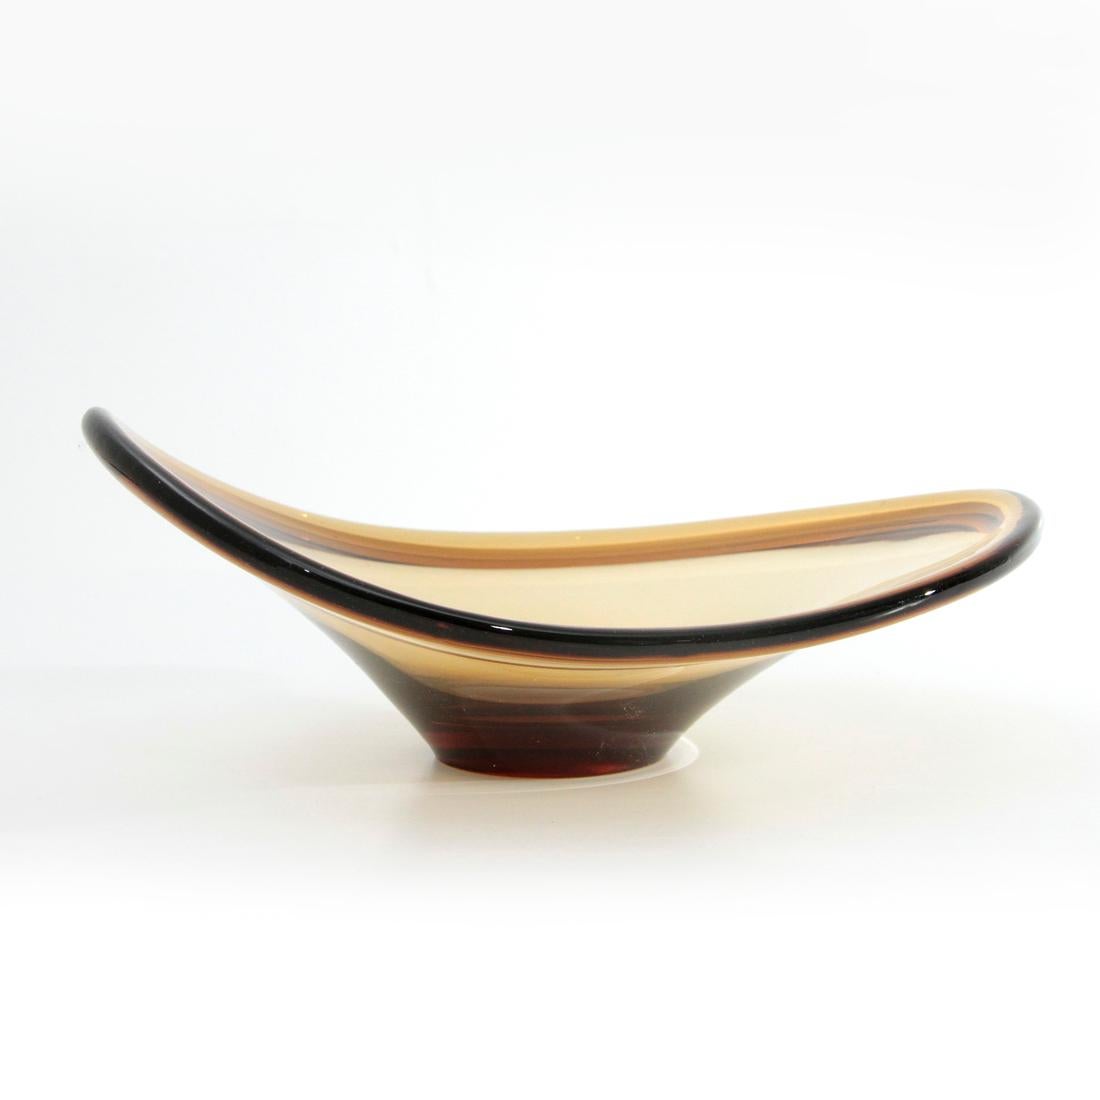 Italian-made bowl produced in the 1960s.
Murano glass of honey color.
Good general conditions.

Dimensions: Width 26.5 cm, depth 20 cm, height 10 cm.